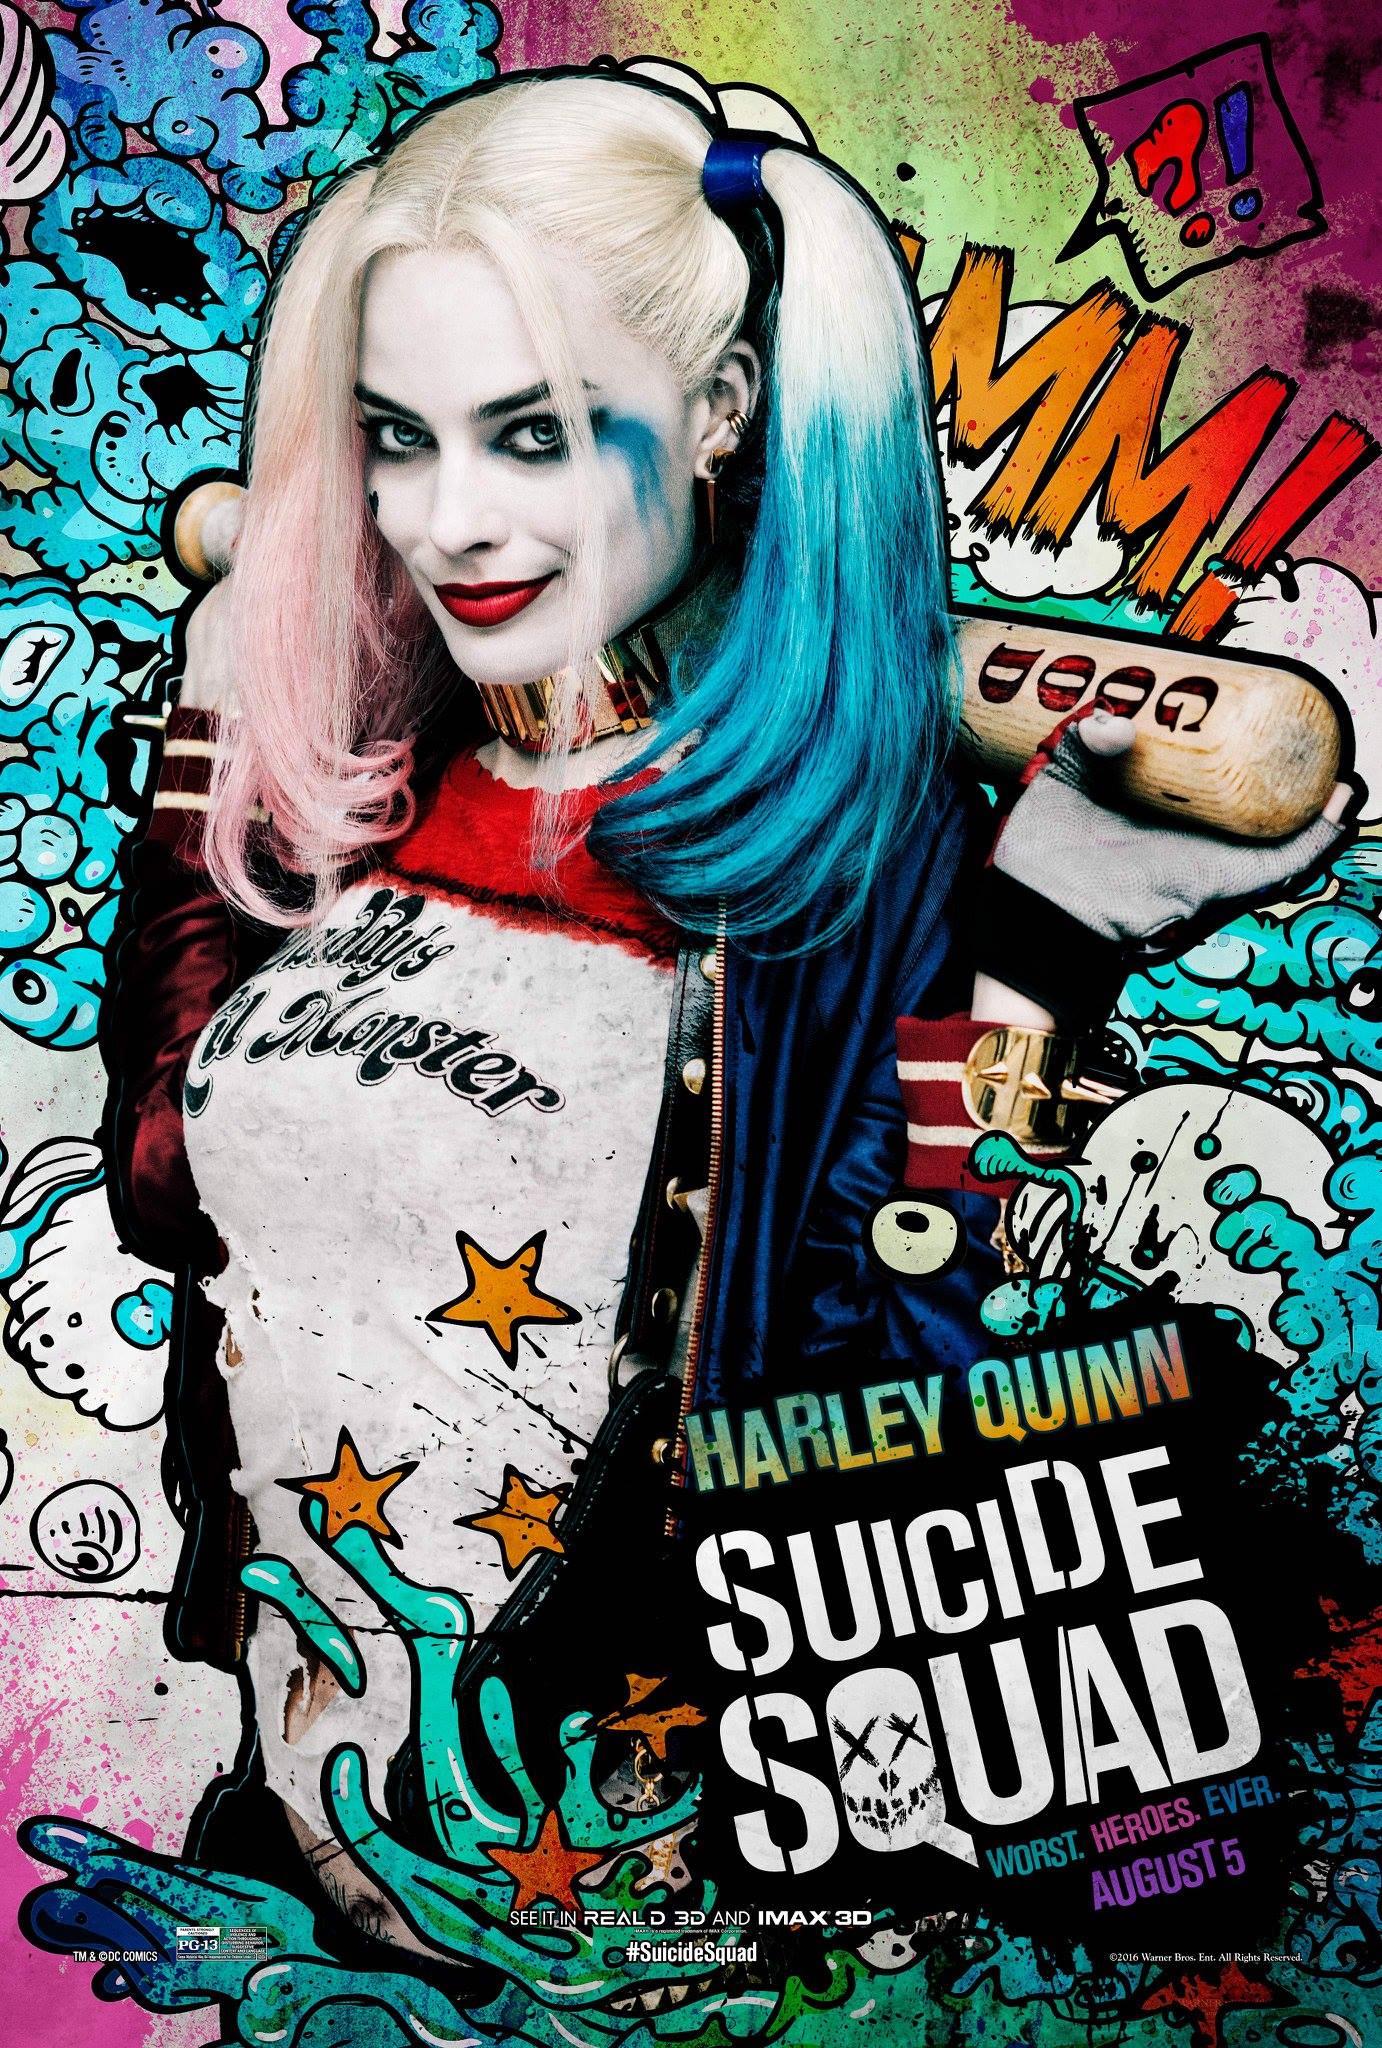 Harley Quinn from Suicide Squad.